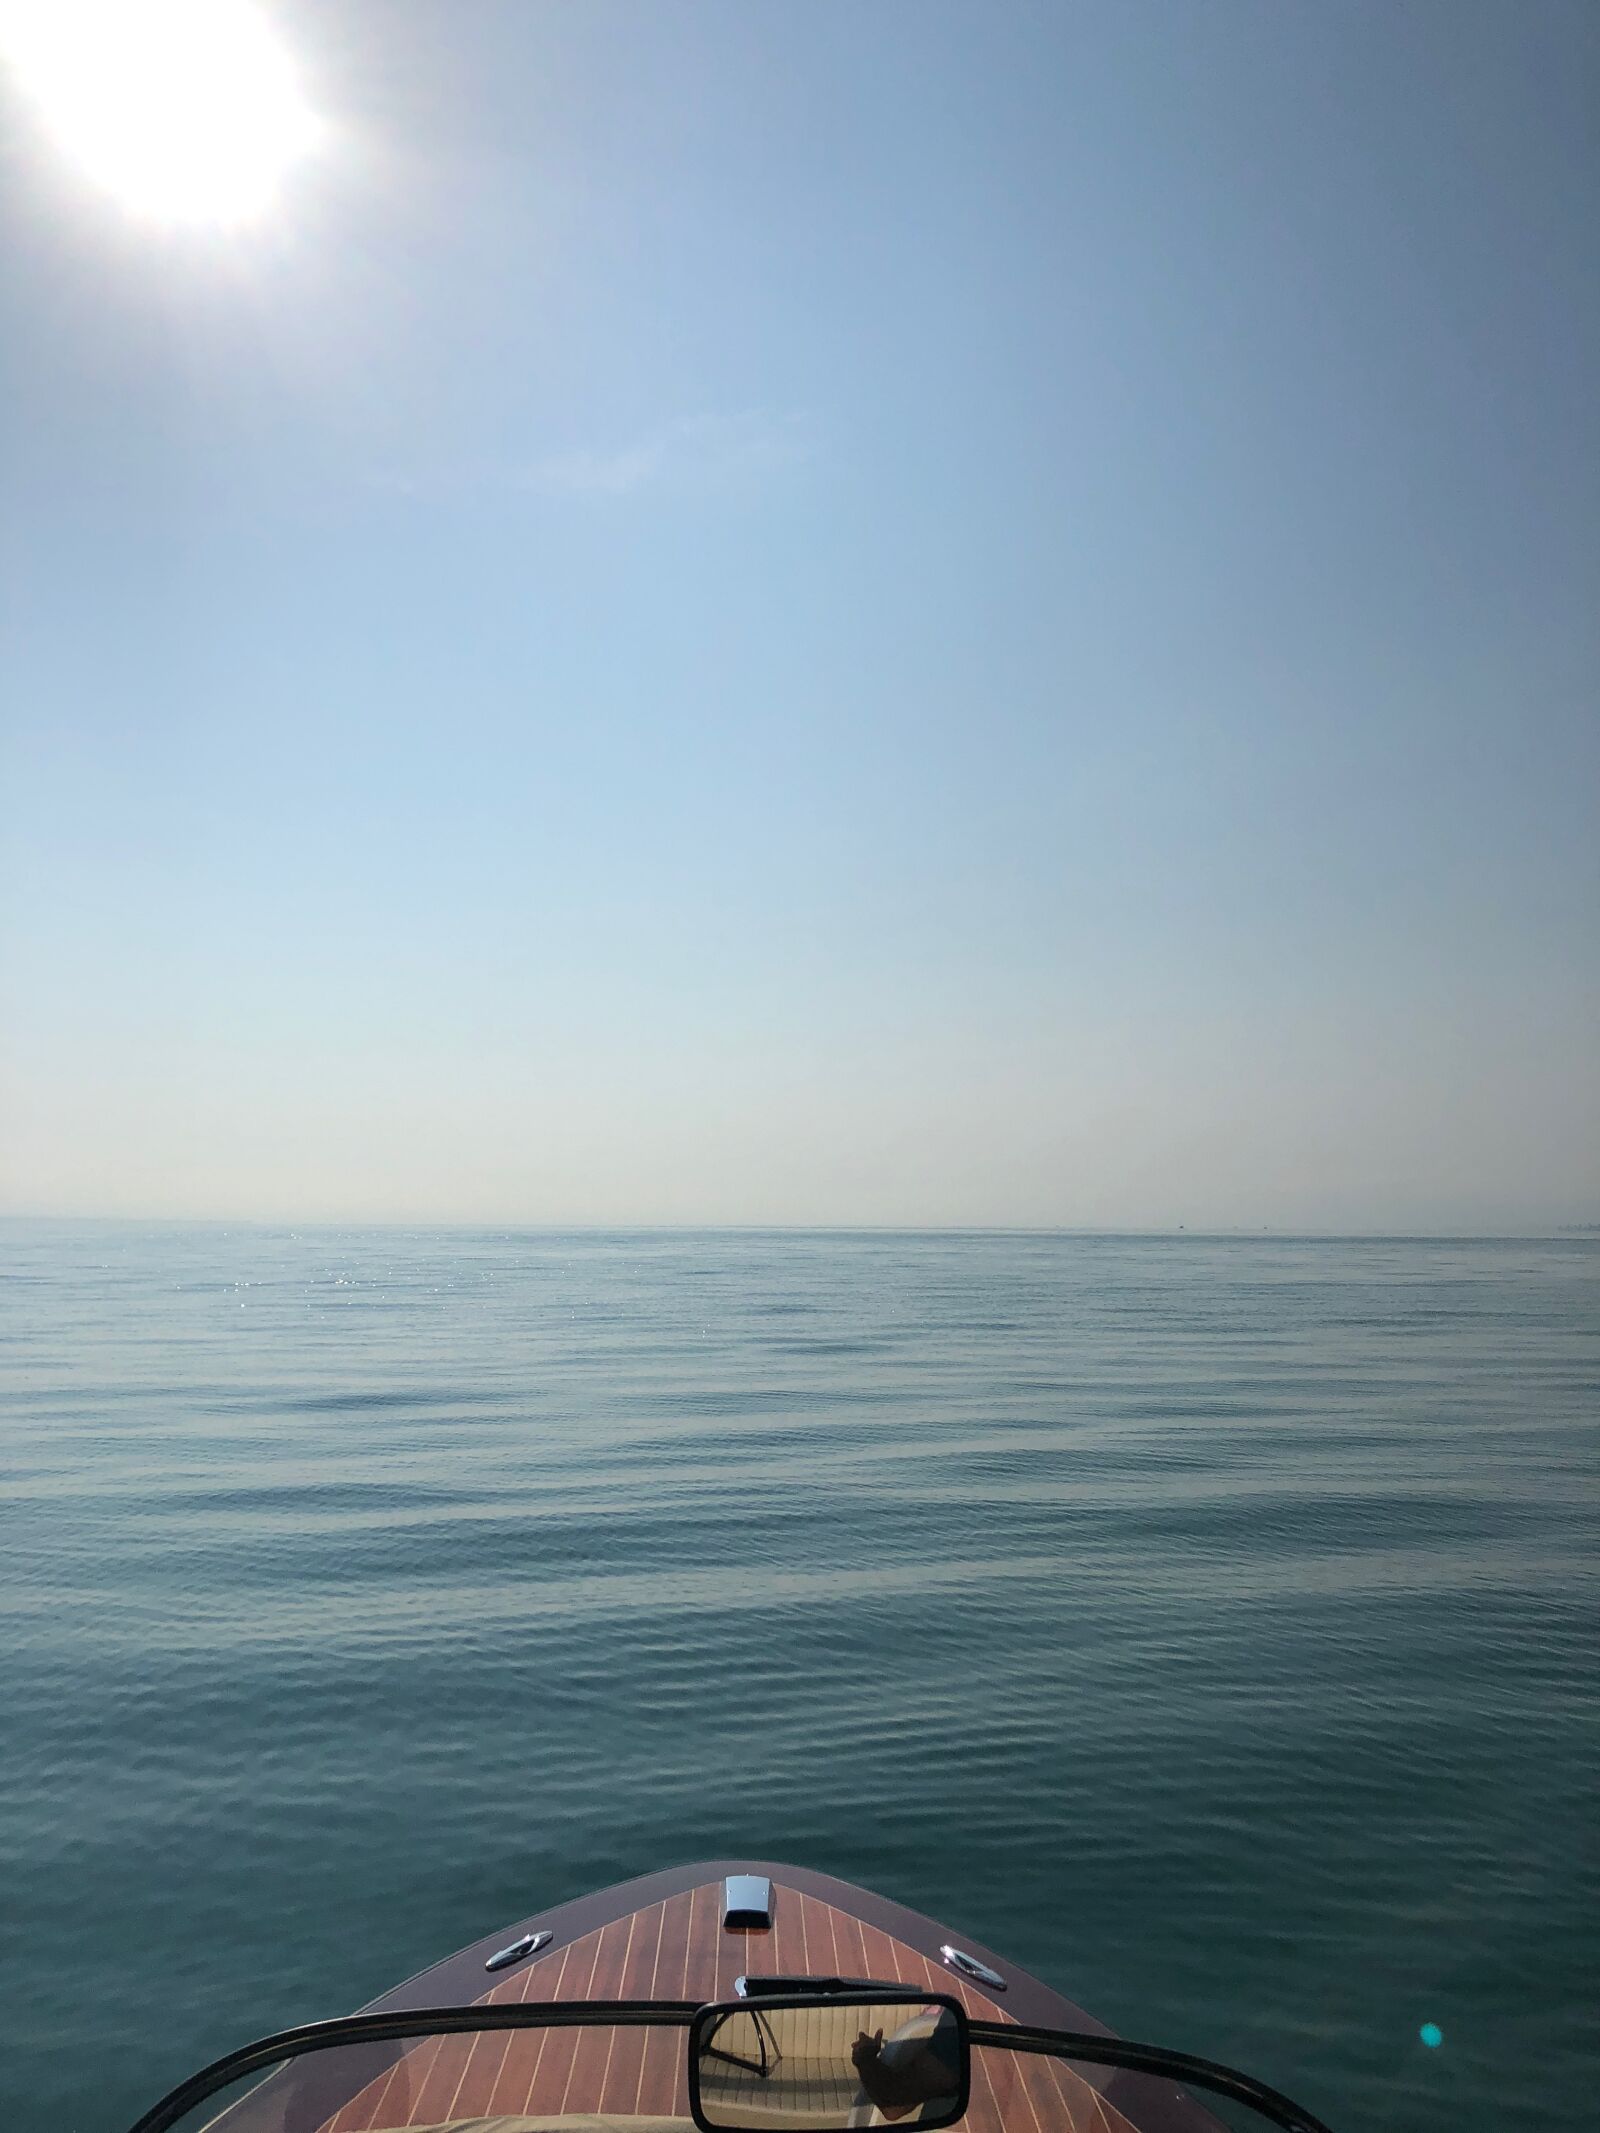 Apple iPhone X sample photo. Boat, lake constance, sky photography